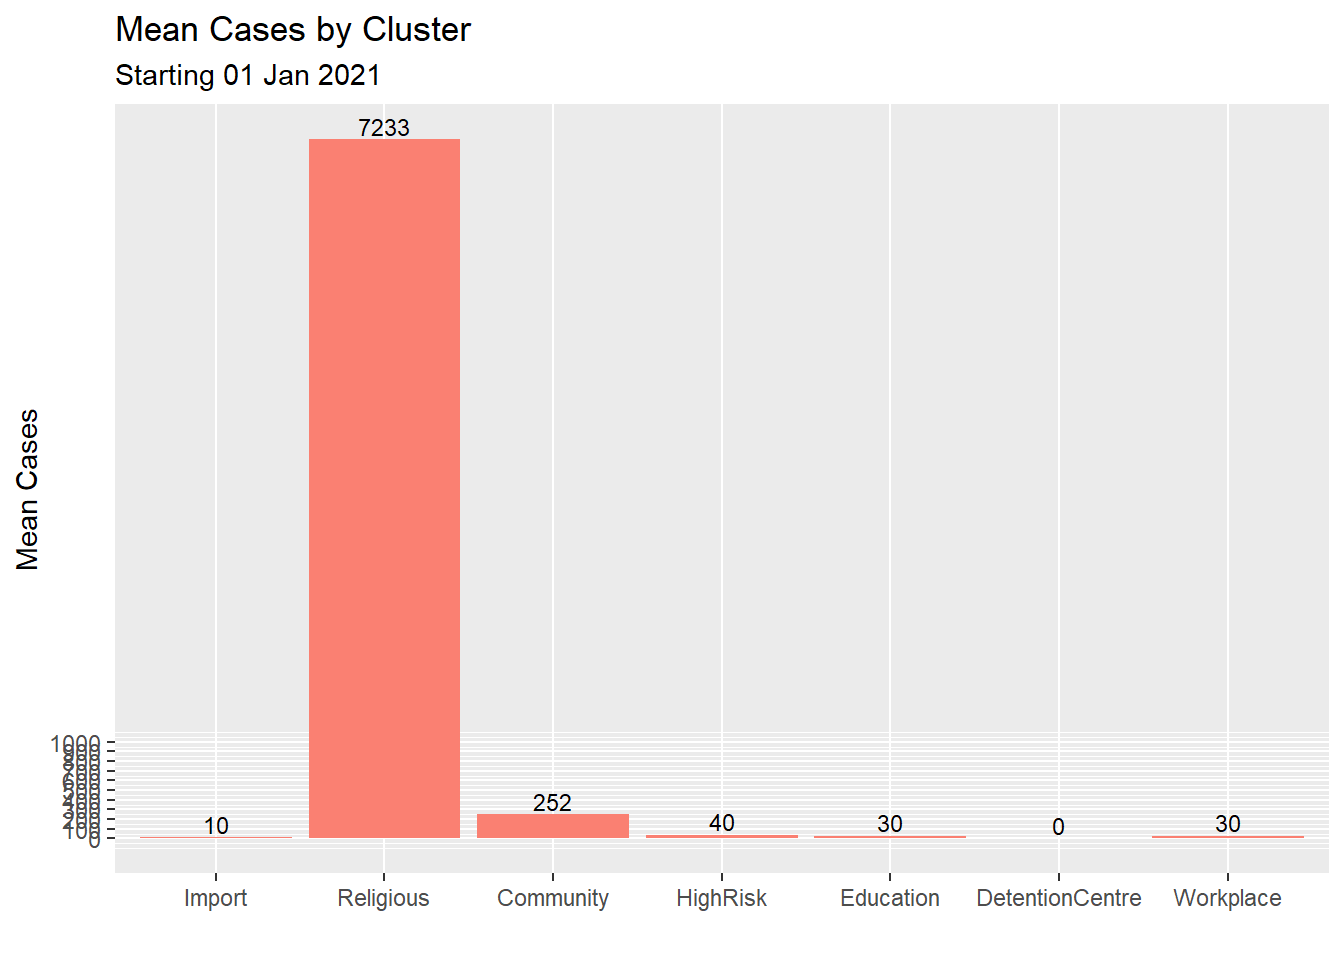 Improved bar chart of the mean for each cluster